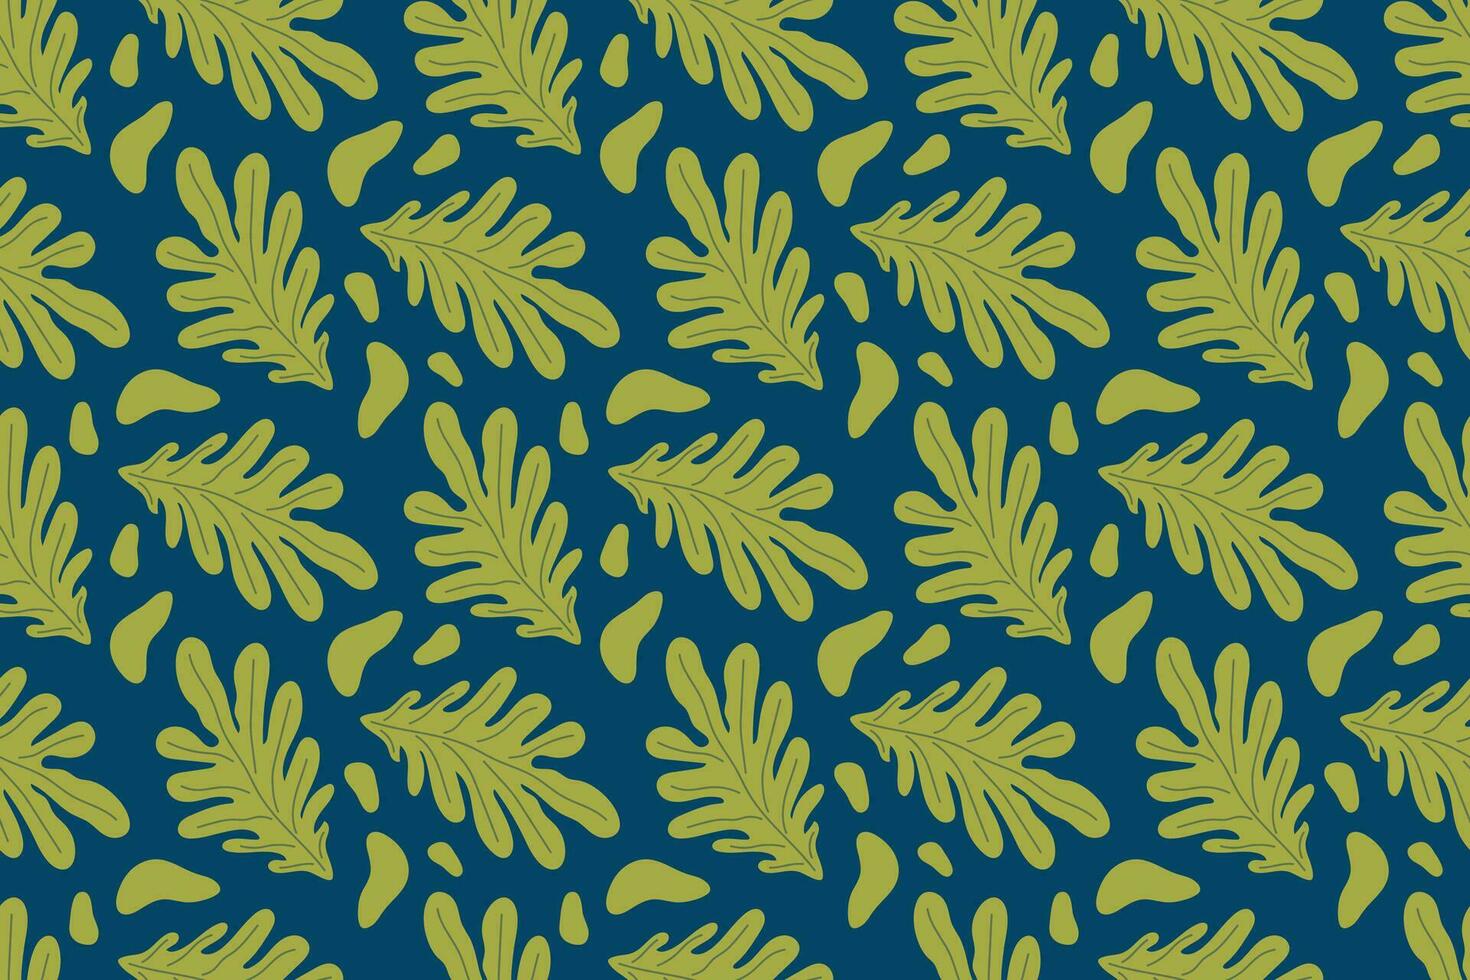 Seamless abstract plant pattern. Green leaves on a dark blue background. Bright spring illustration vector